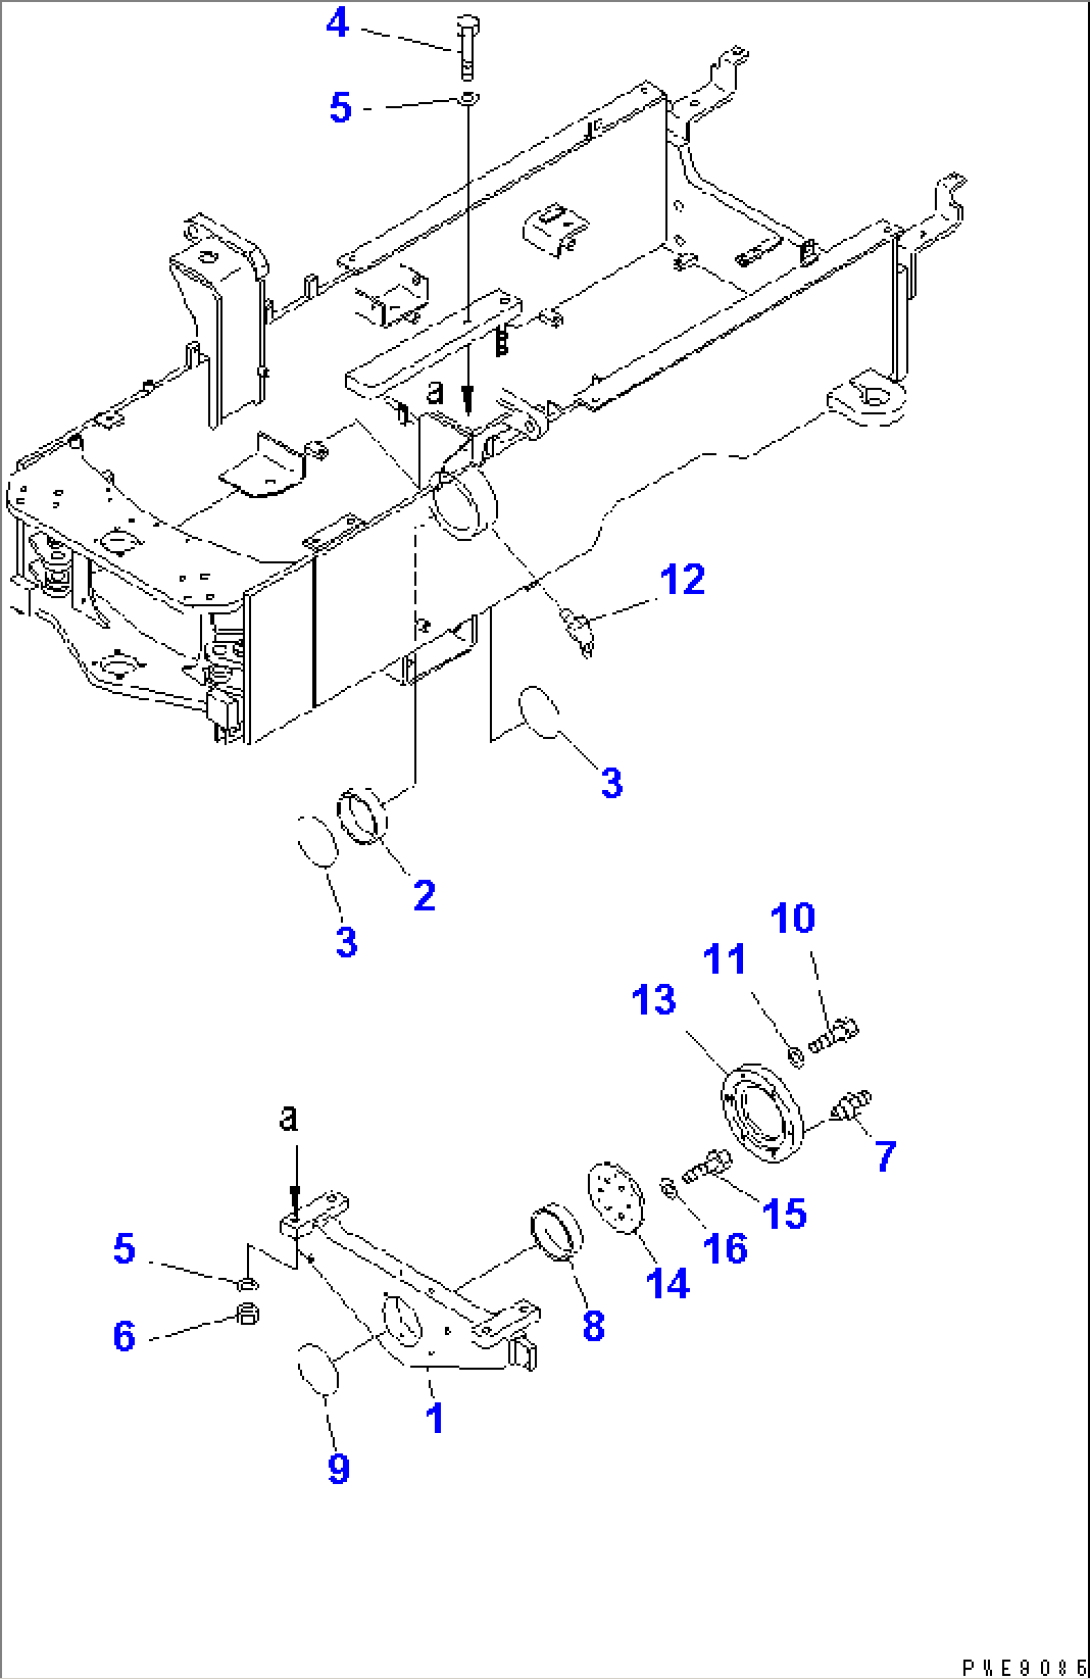 REAR AXLE SUPPORT